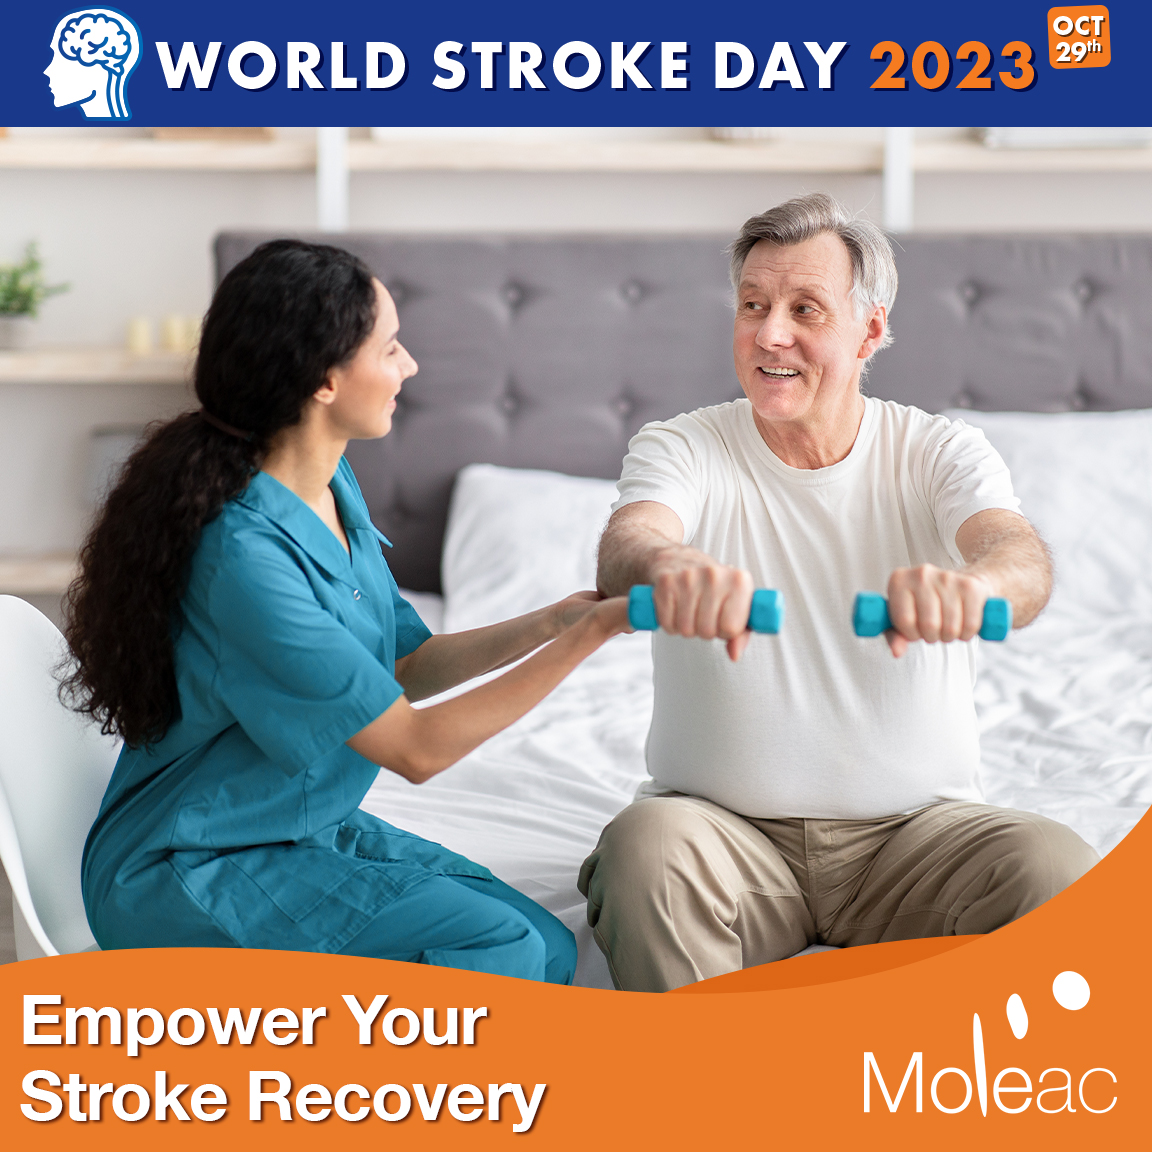 Join Us on World Stroke Day 2023!